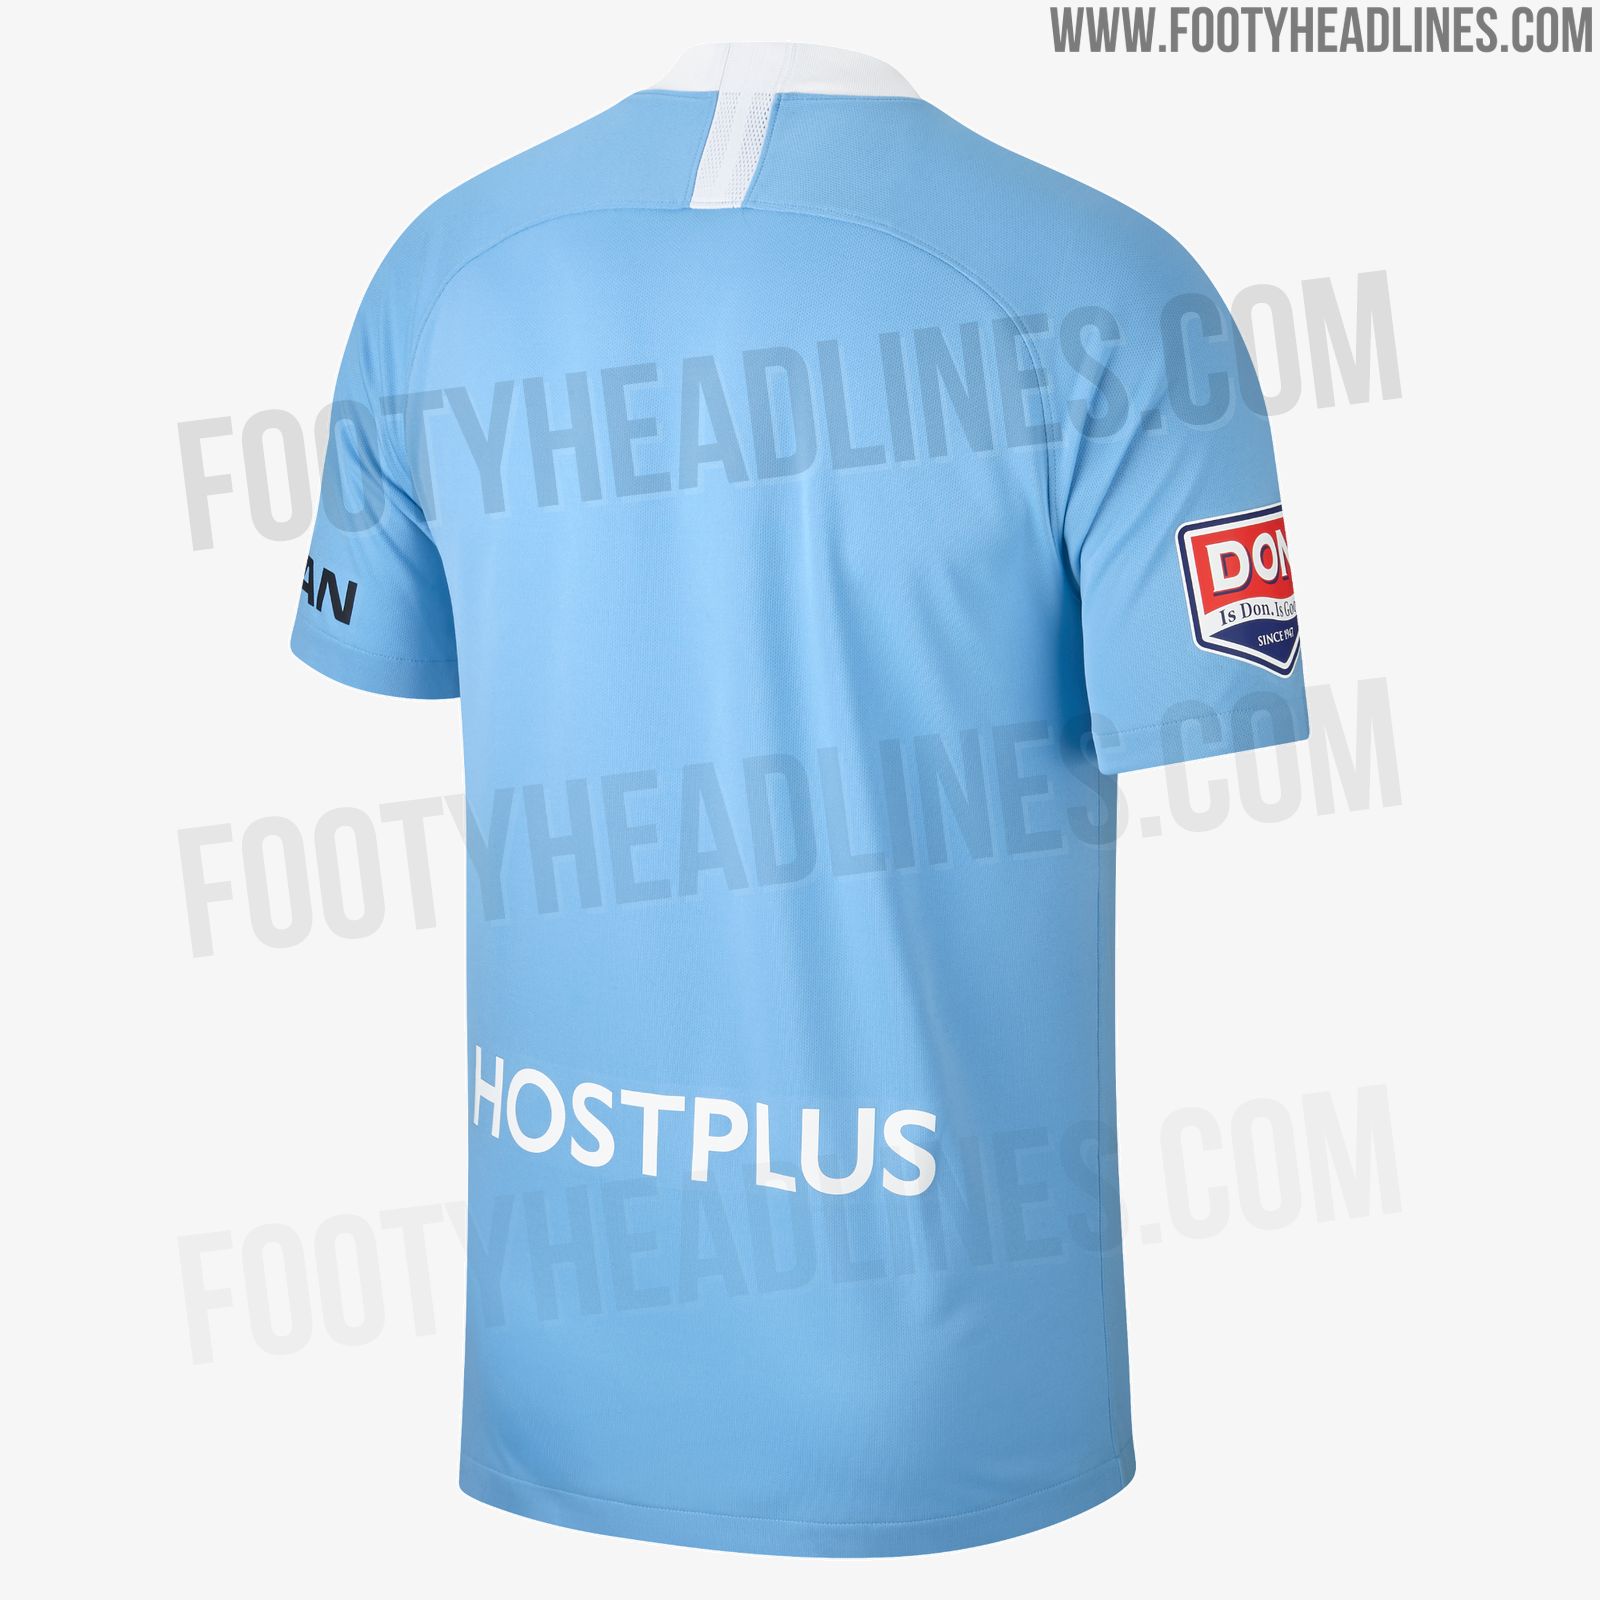 Melbourne City 18-19 Home & Away Kits Leaked - Footy Headlines